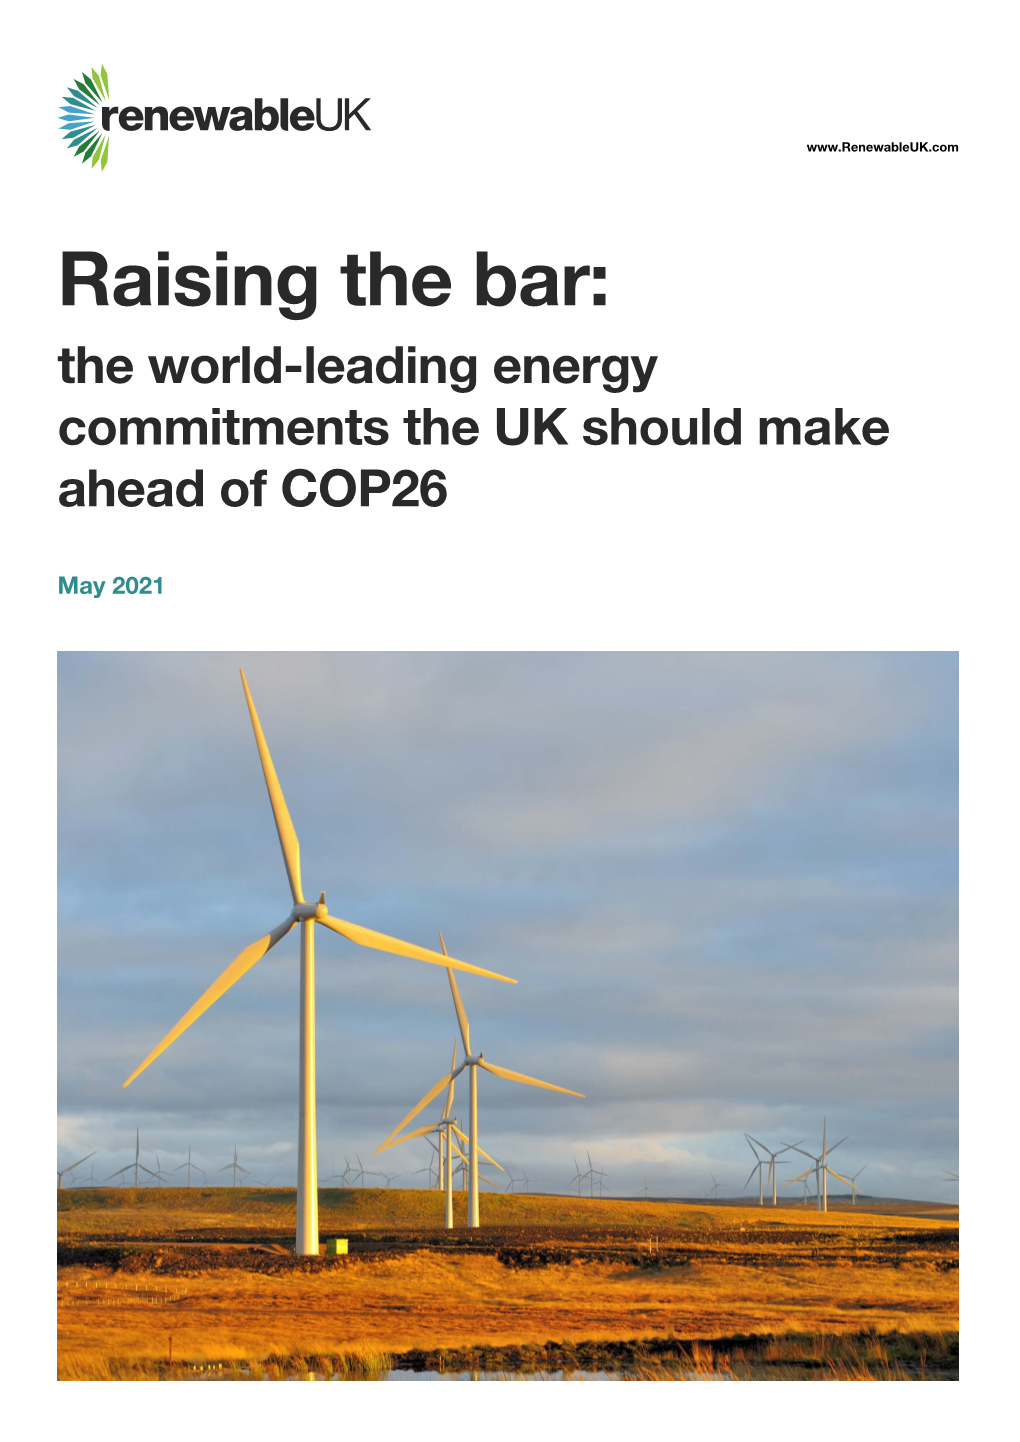 Raising the Bar: the World-Leading Energy Commitments the UK Should Make Ahead of COP26